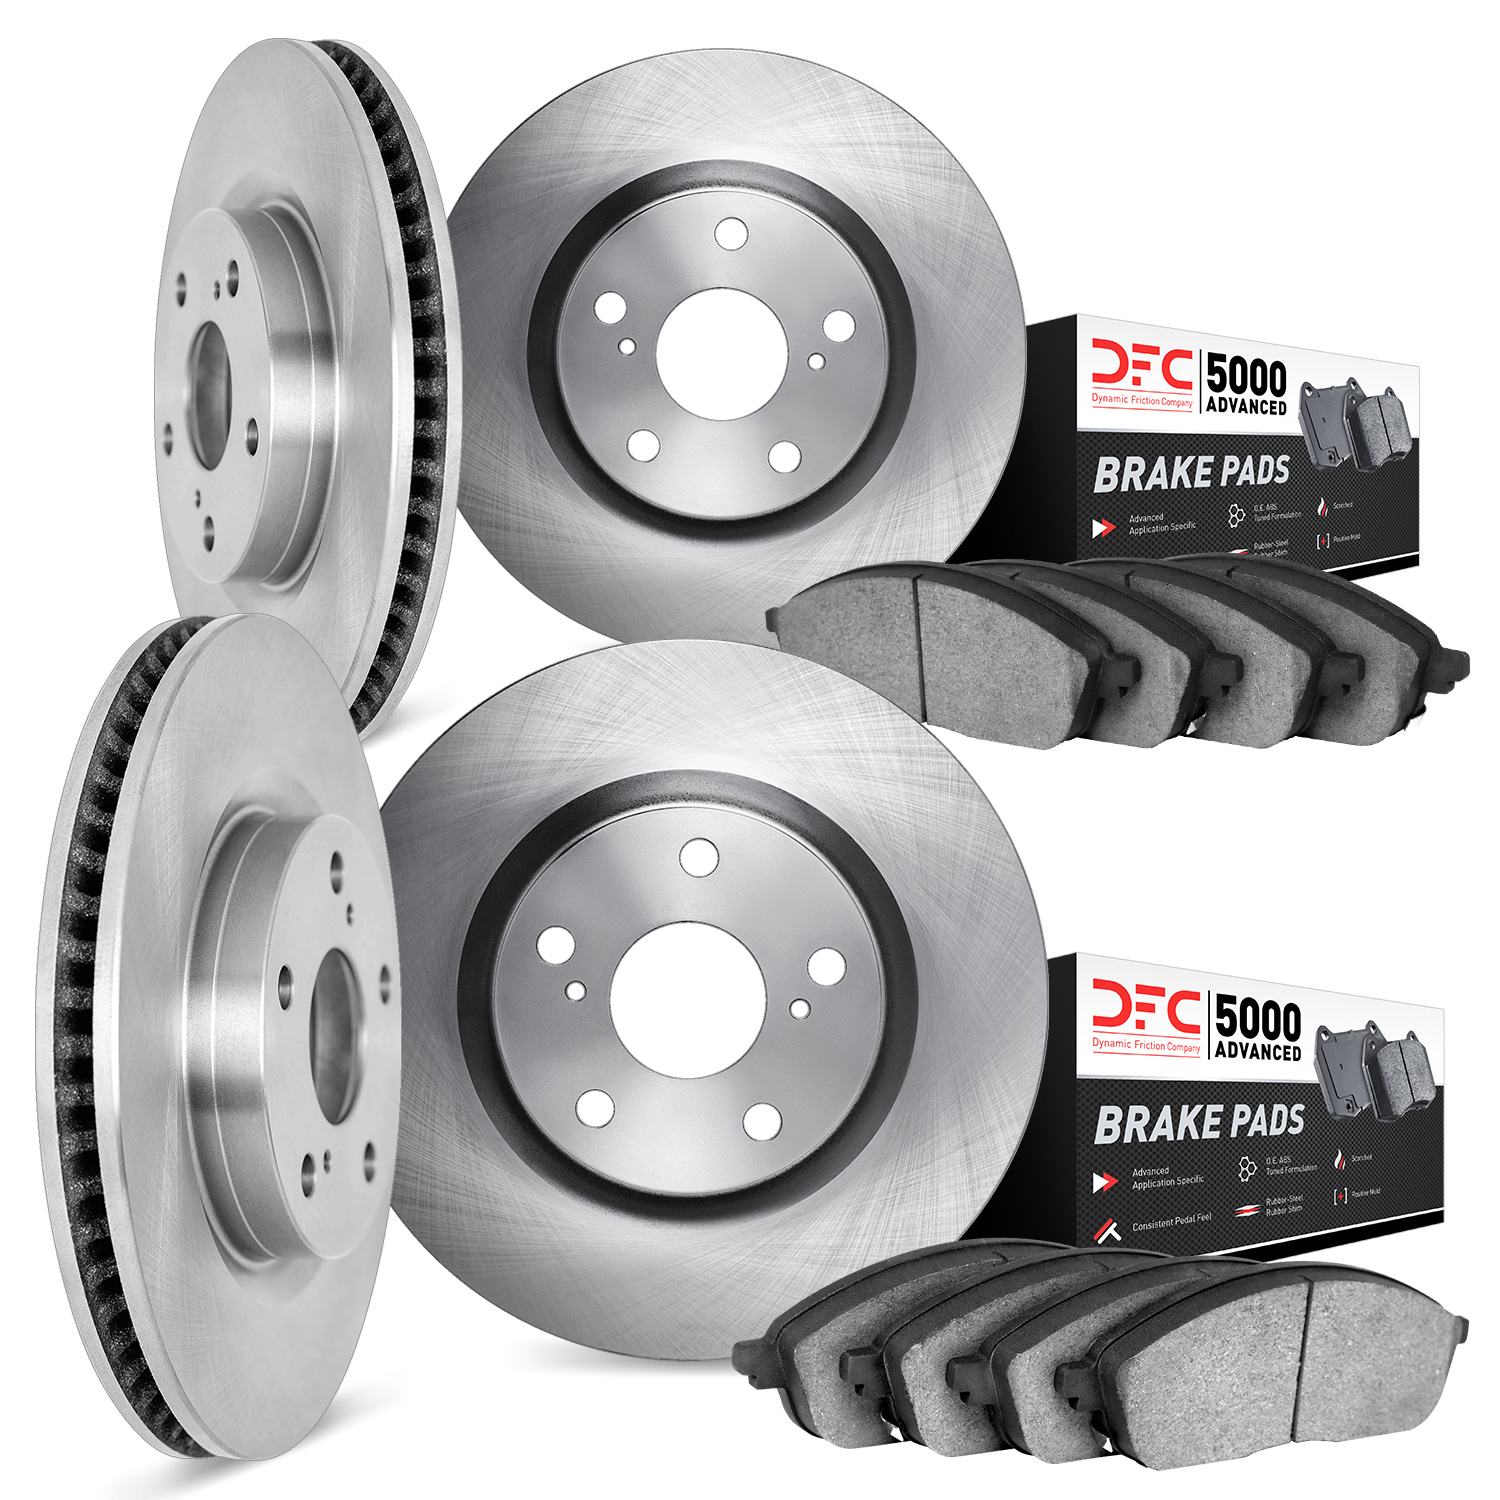 6504-31028 Brake Rotors w/5000 Advanced Brake Pads Kit, 2004-2007 BMW, Position: Front and Rear